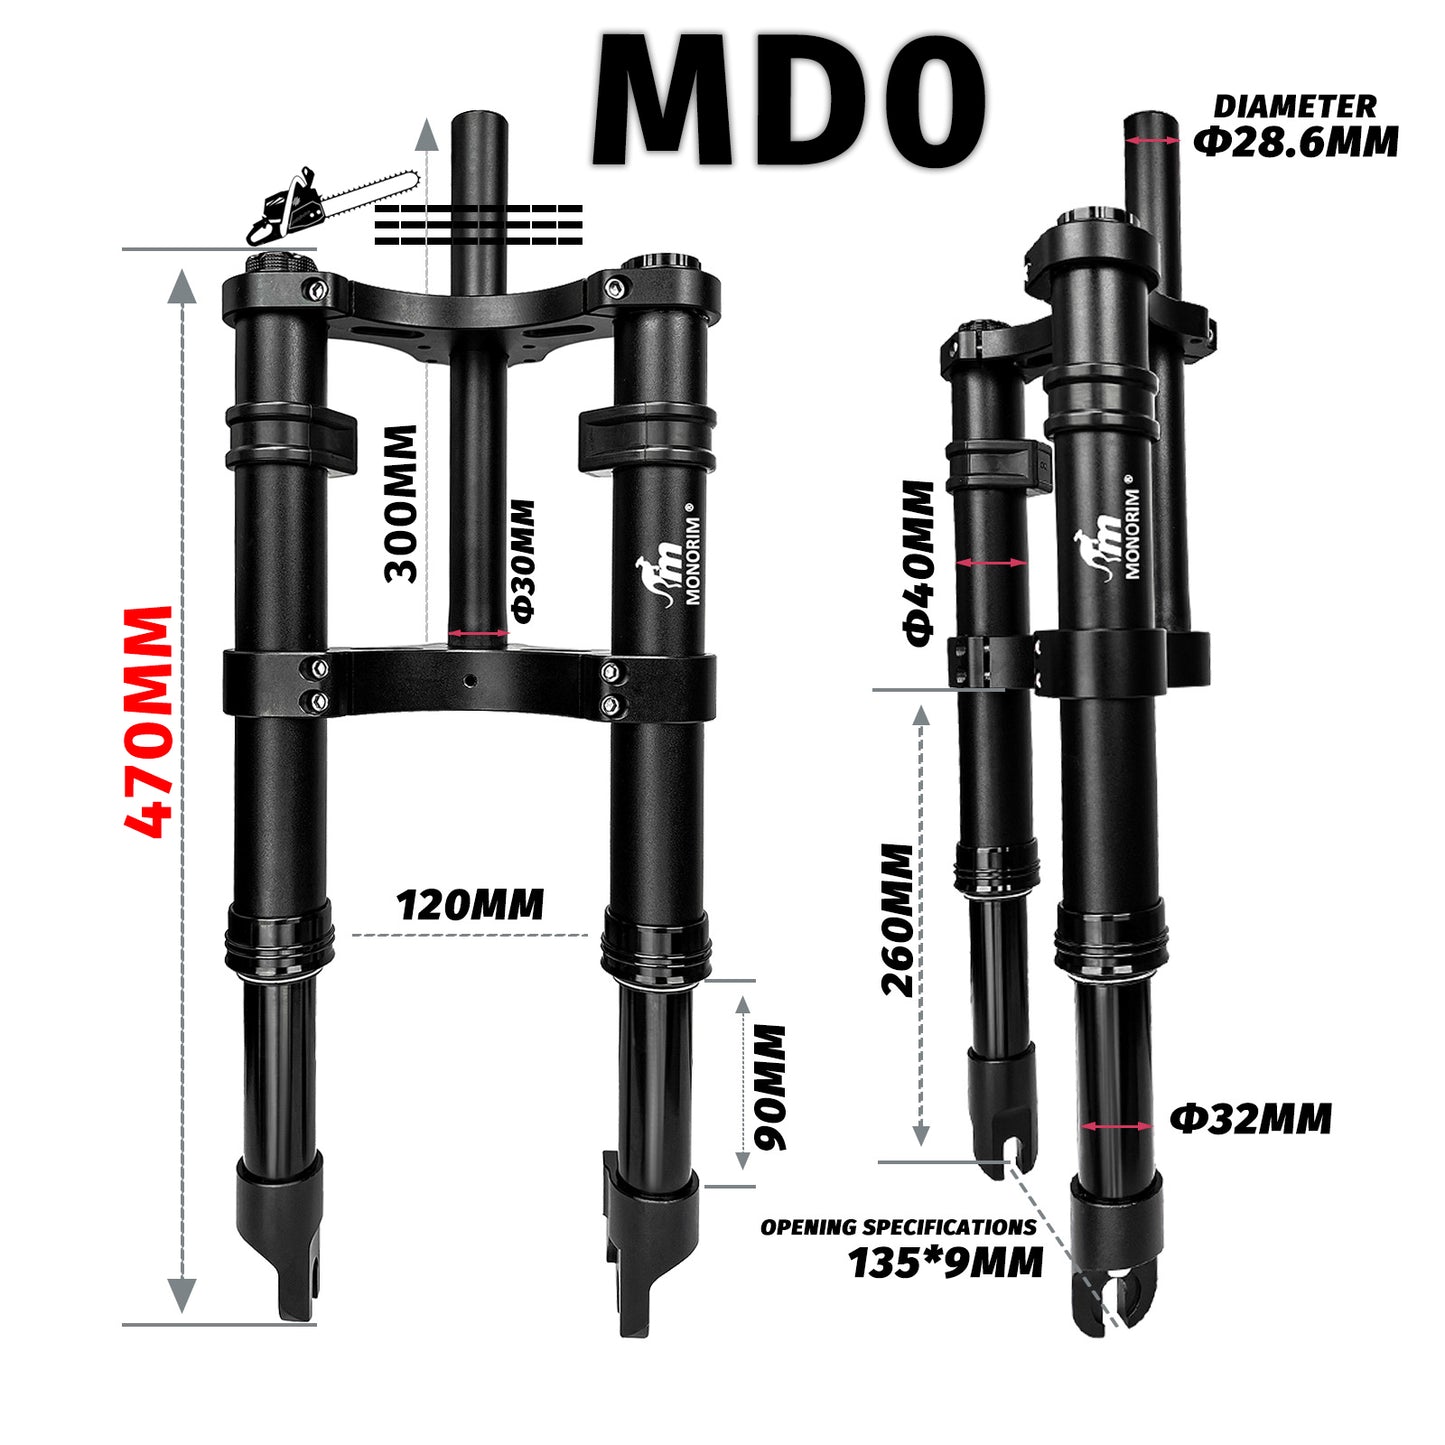 Monorim MD0-14inch front suspension modify great kit to be more safety and comfort for Ado A16 ebike ：